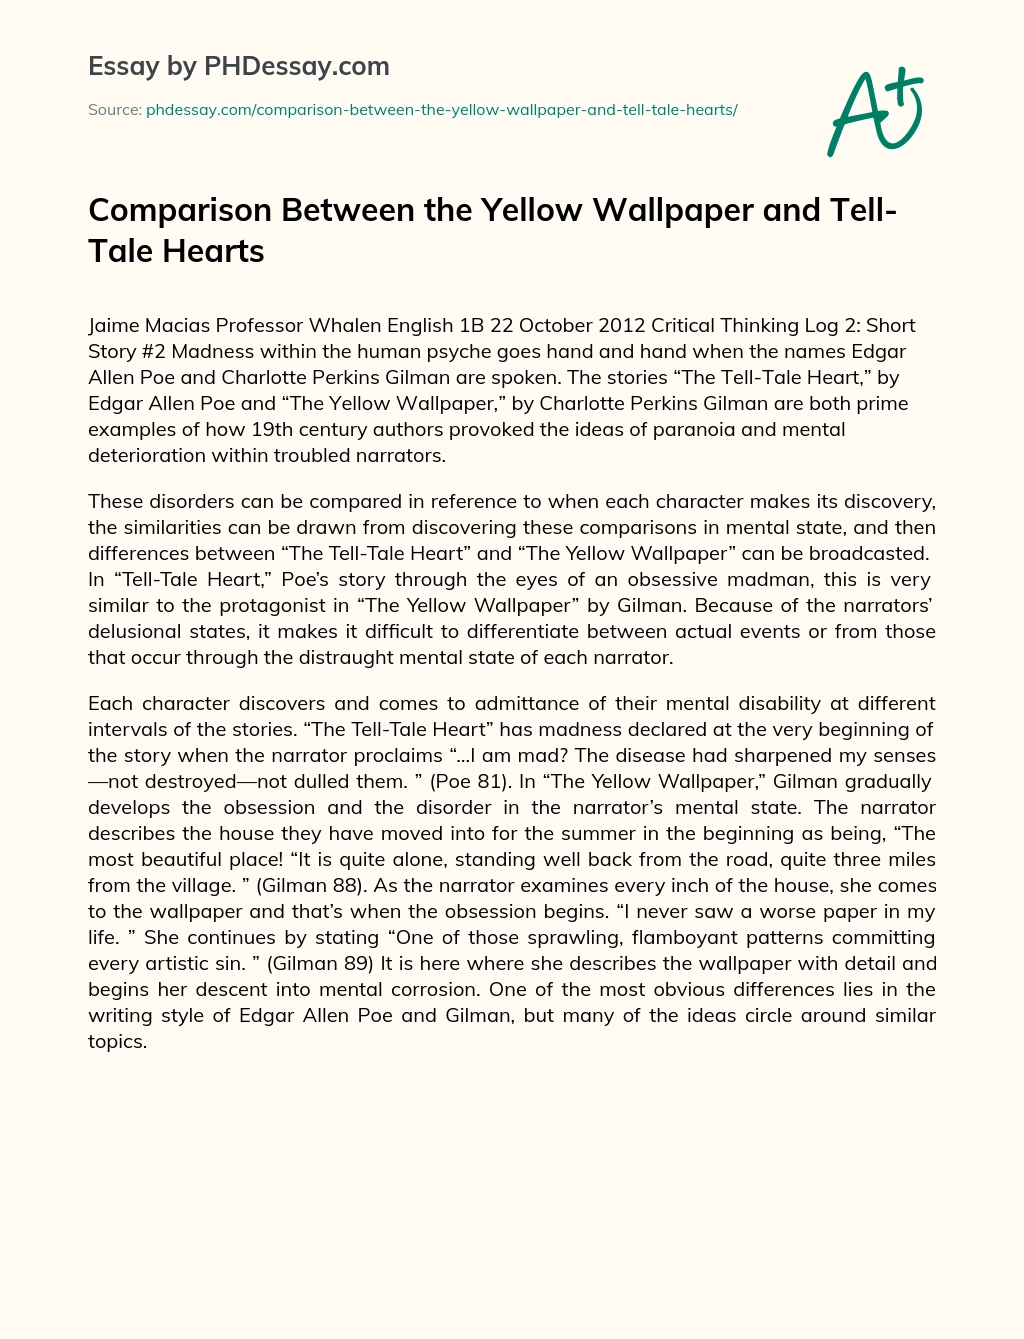 Comparison Between the Yellow Wallpaper and Tell-Tale Hearts essay